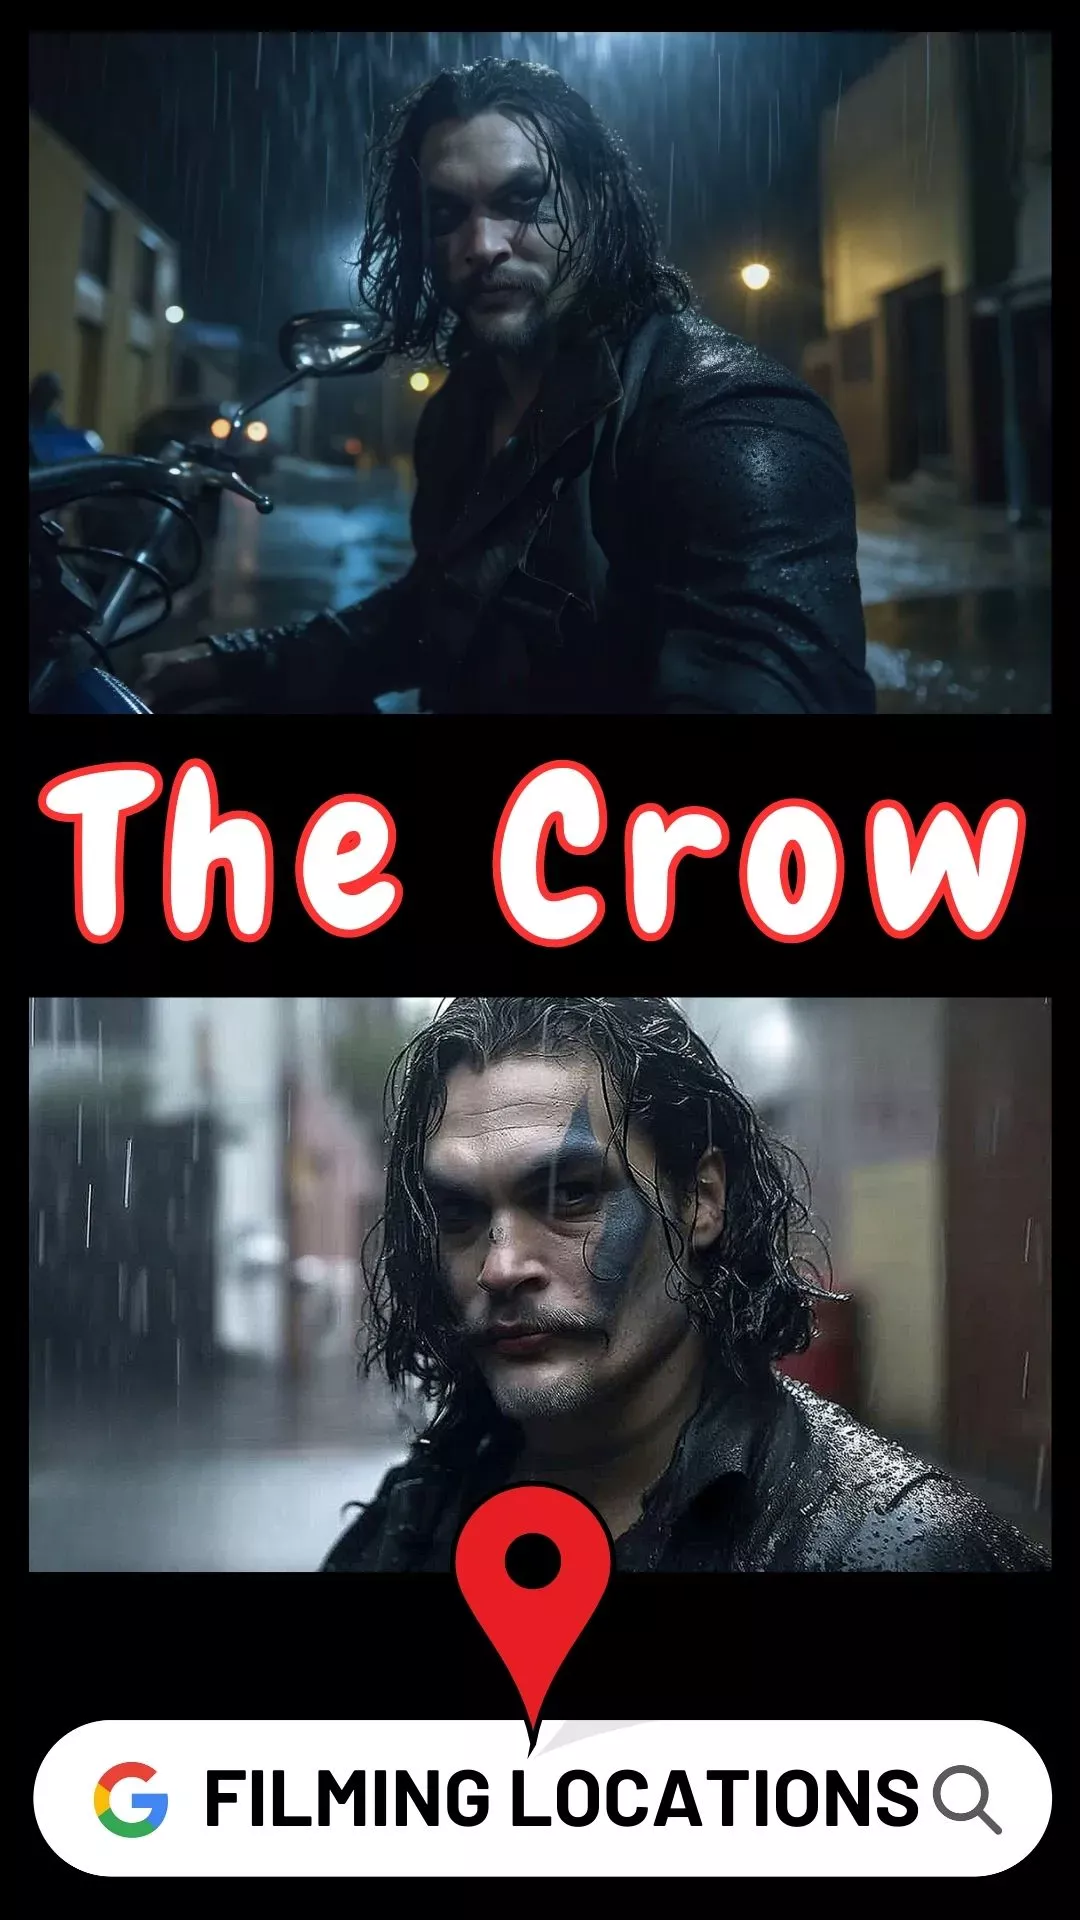 The Crow Filming Locations